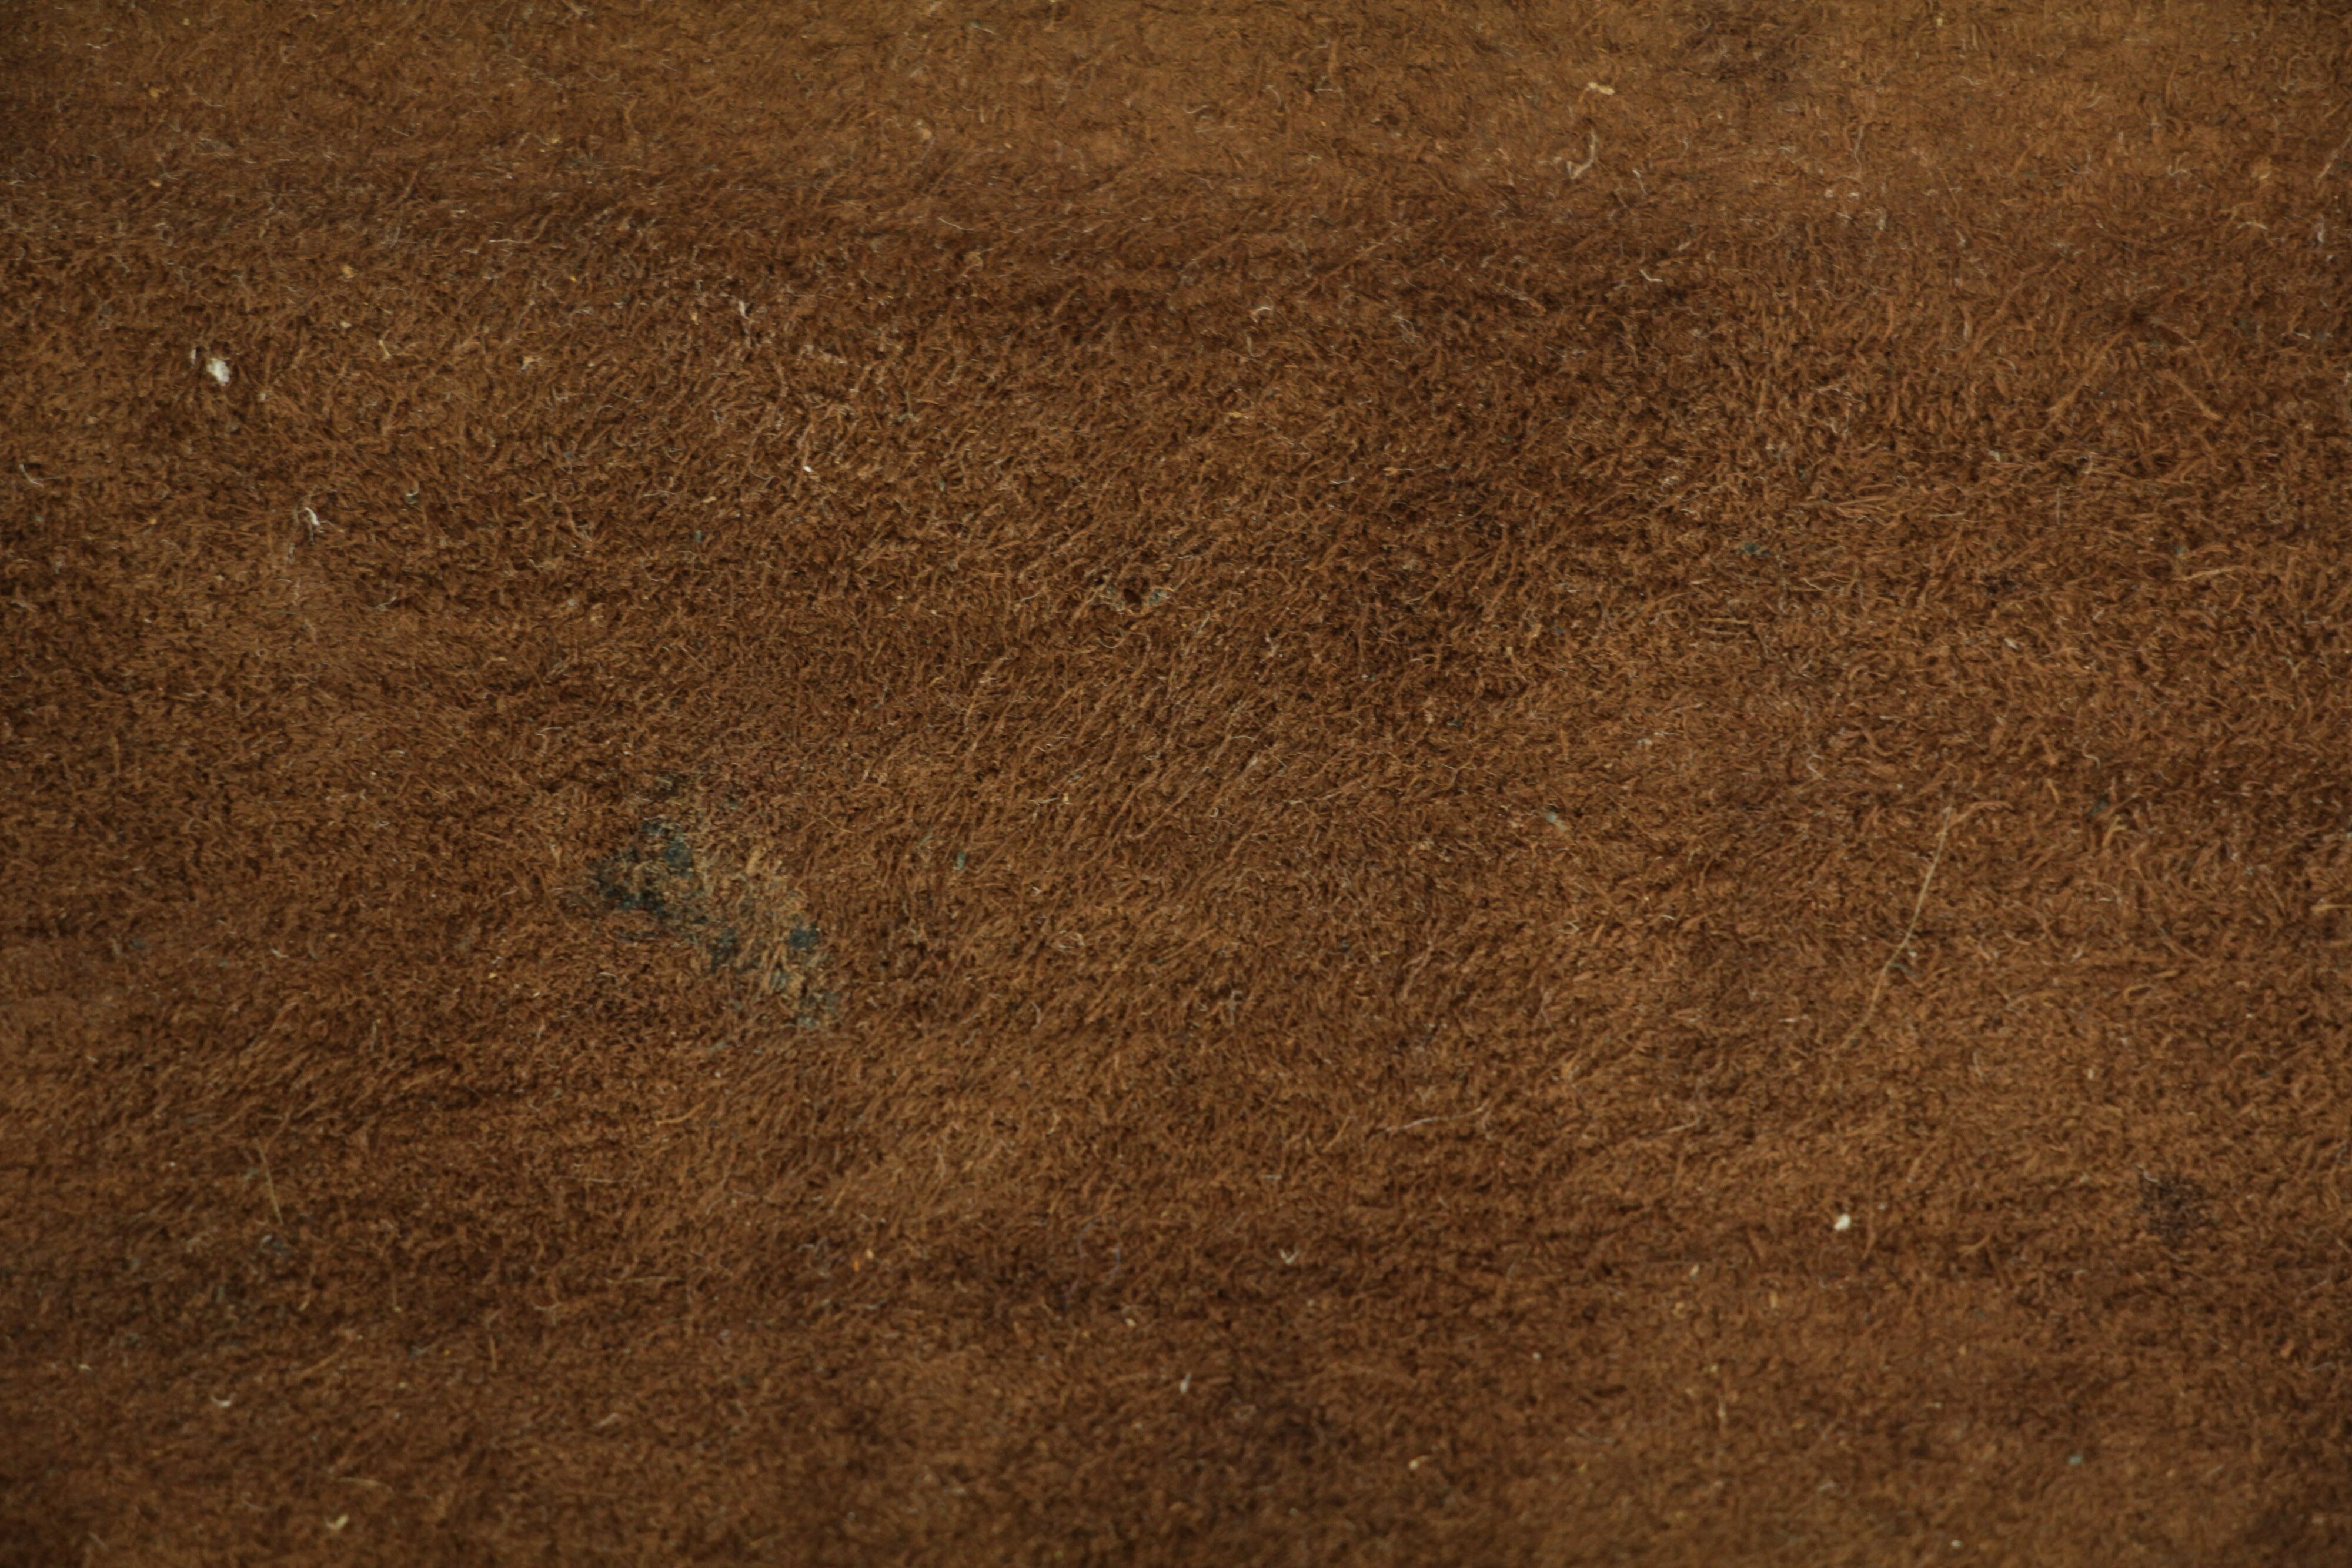 Brown Wallpaper: HD, 4K, 5K for PC and Mobile. Download free image for iPhone, Android